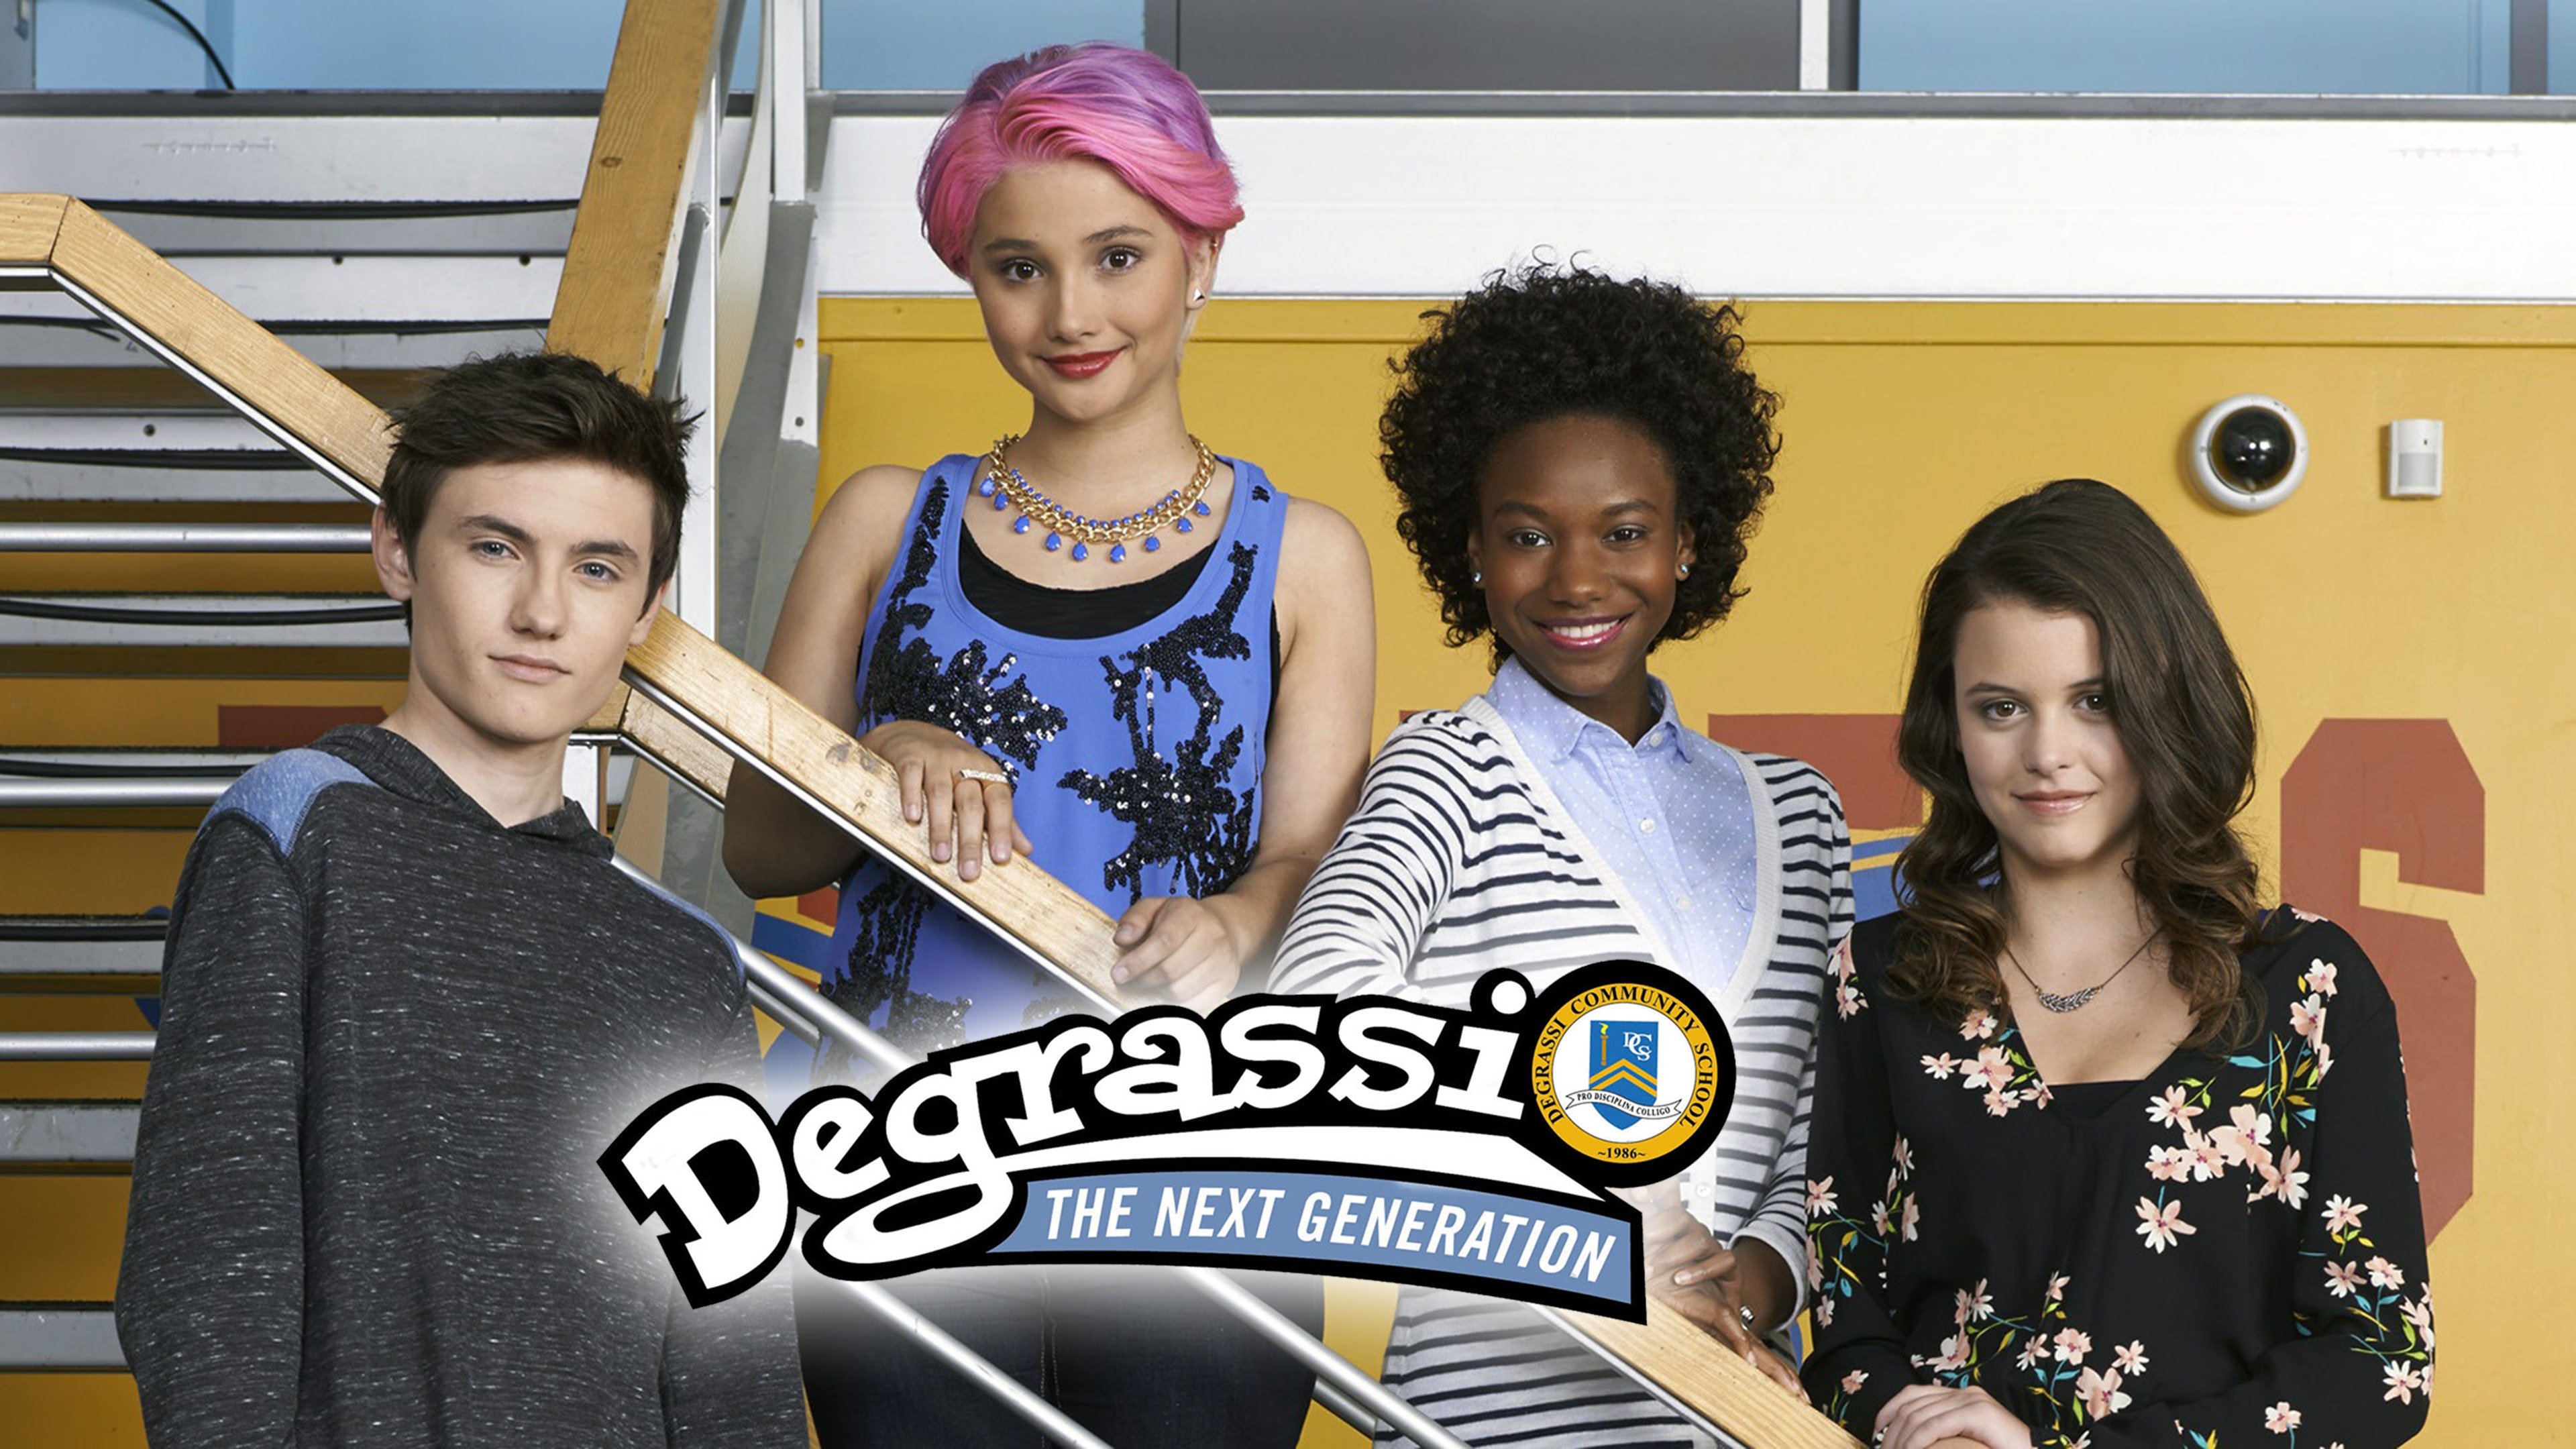 Degrassi: The Next Generation - Nickelodeon Series - Where To Watch